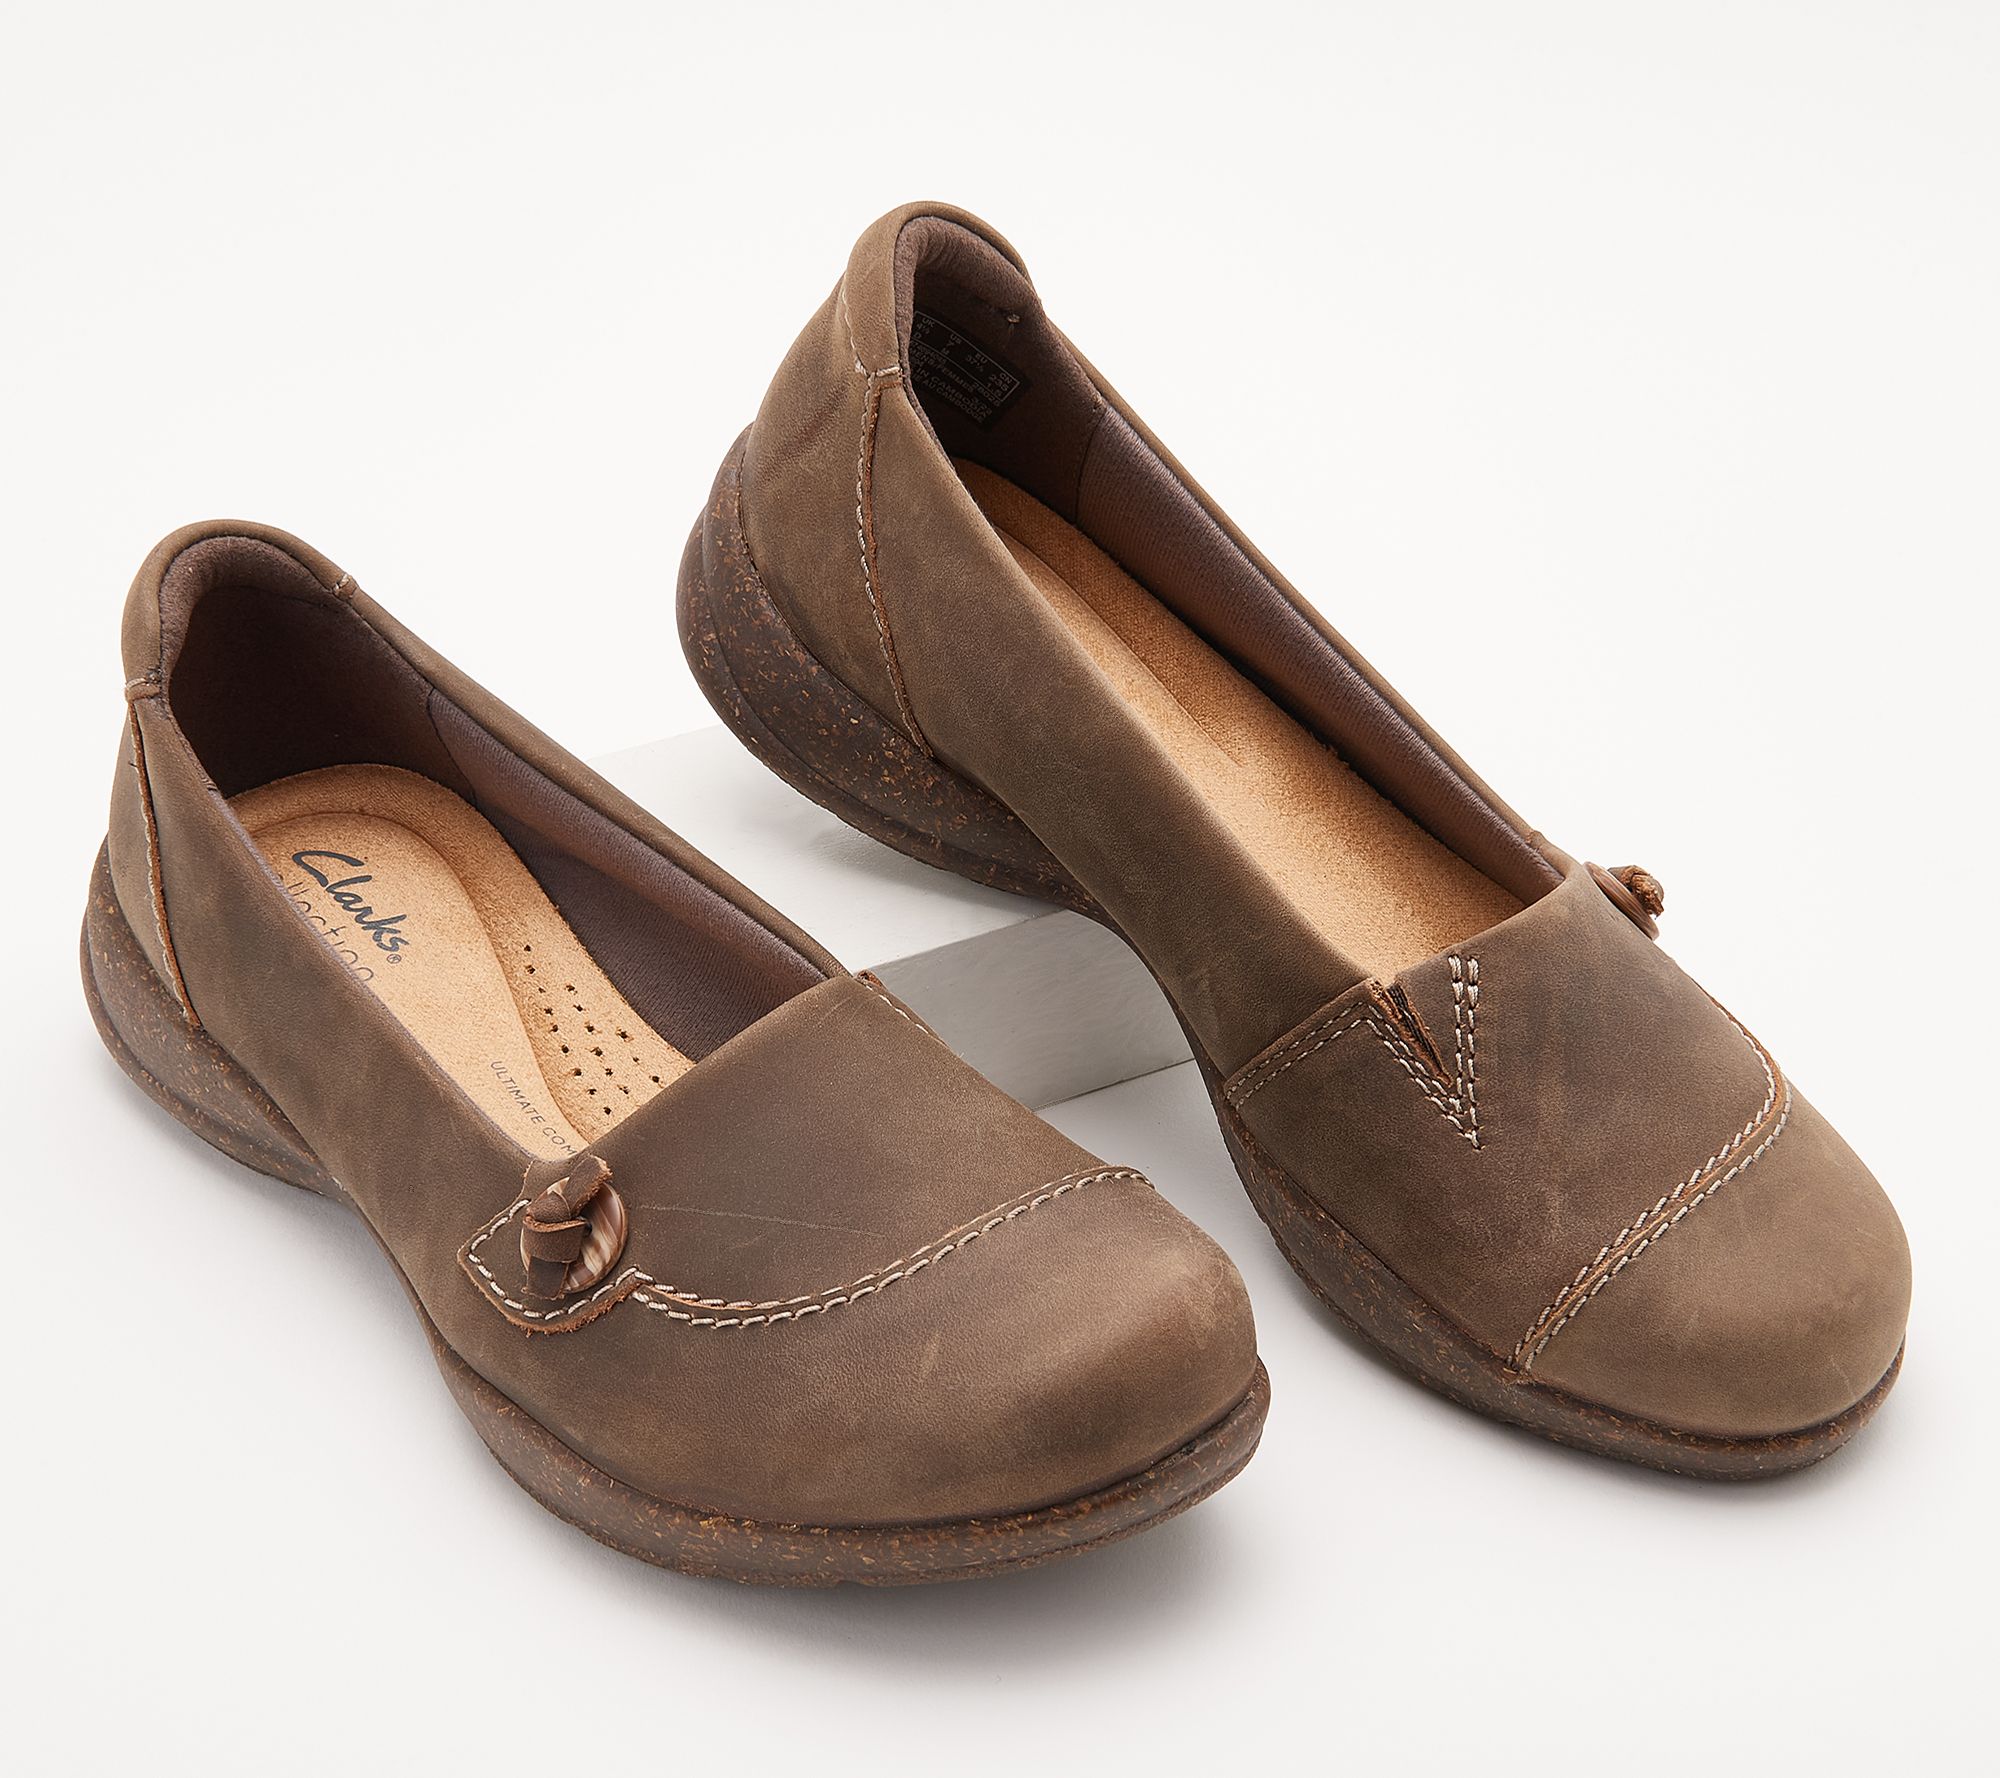 Clarks Collection Leather Slip-Ons Roseville Sky - QVC.com